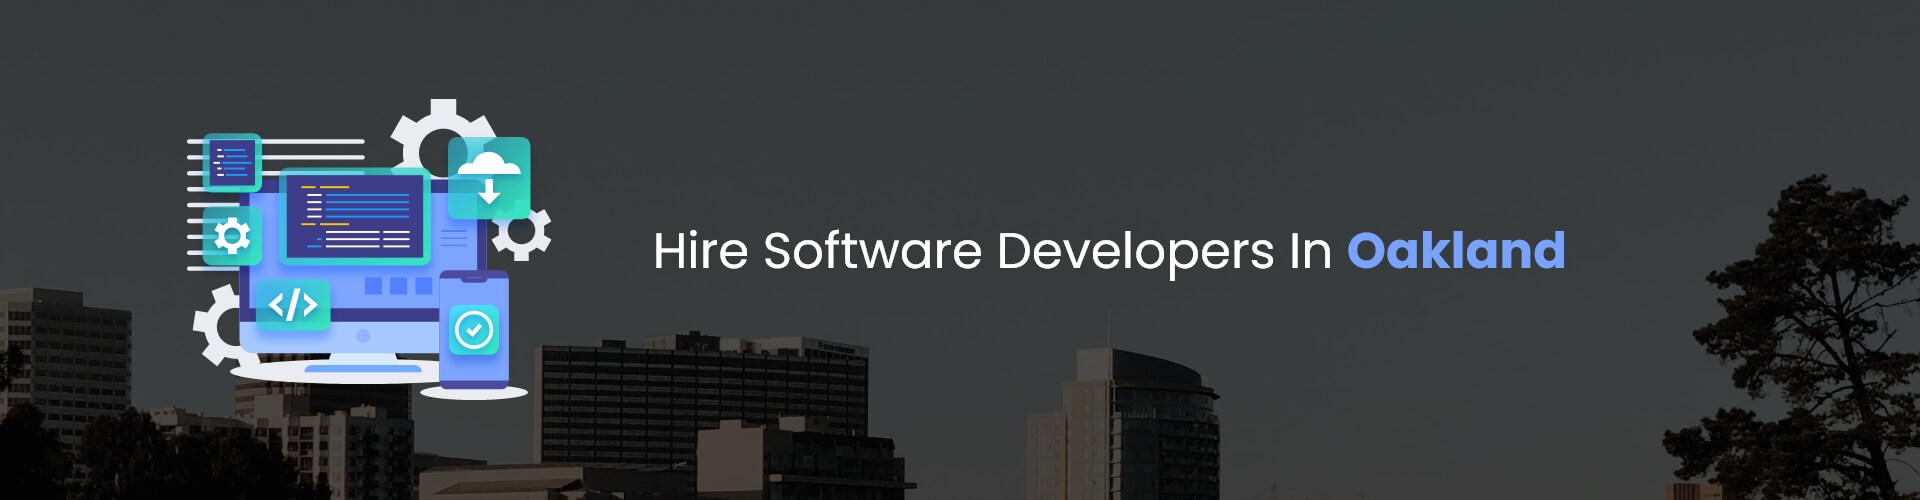 hire software developers in oakland